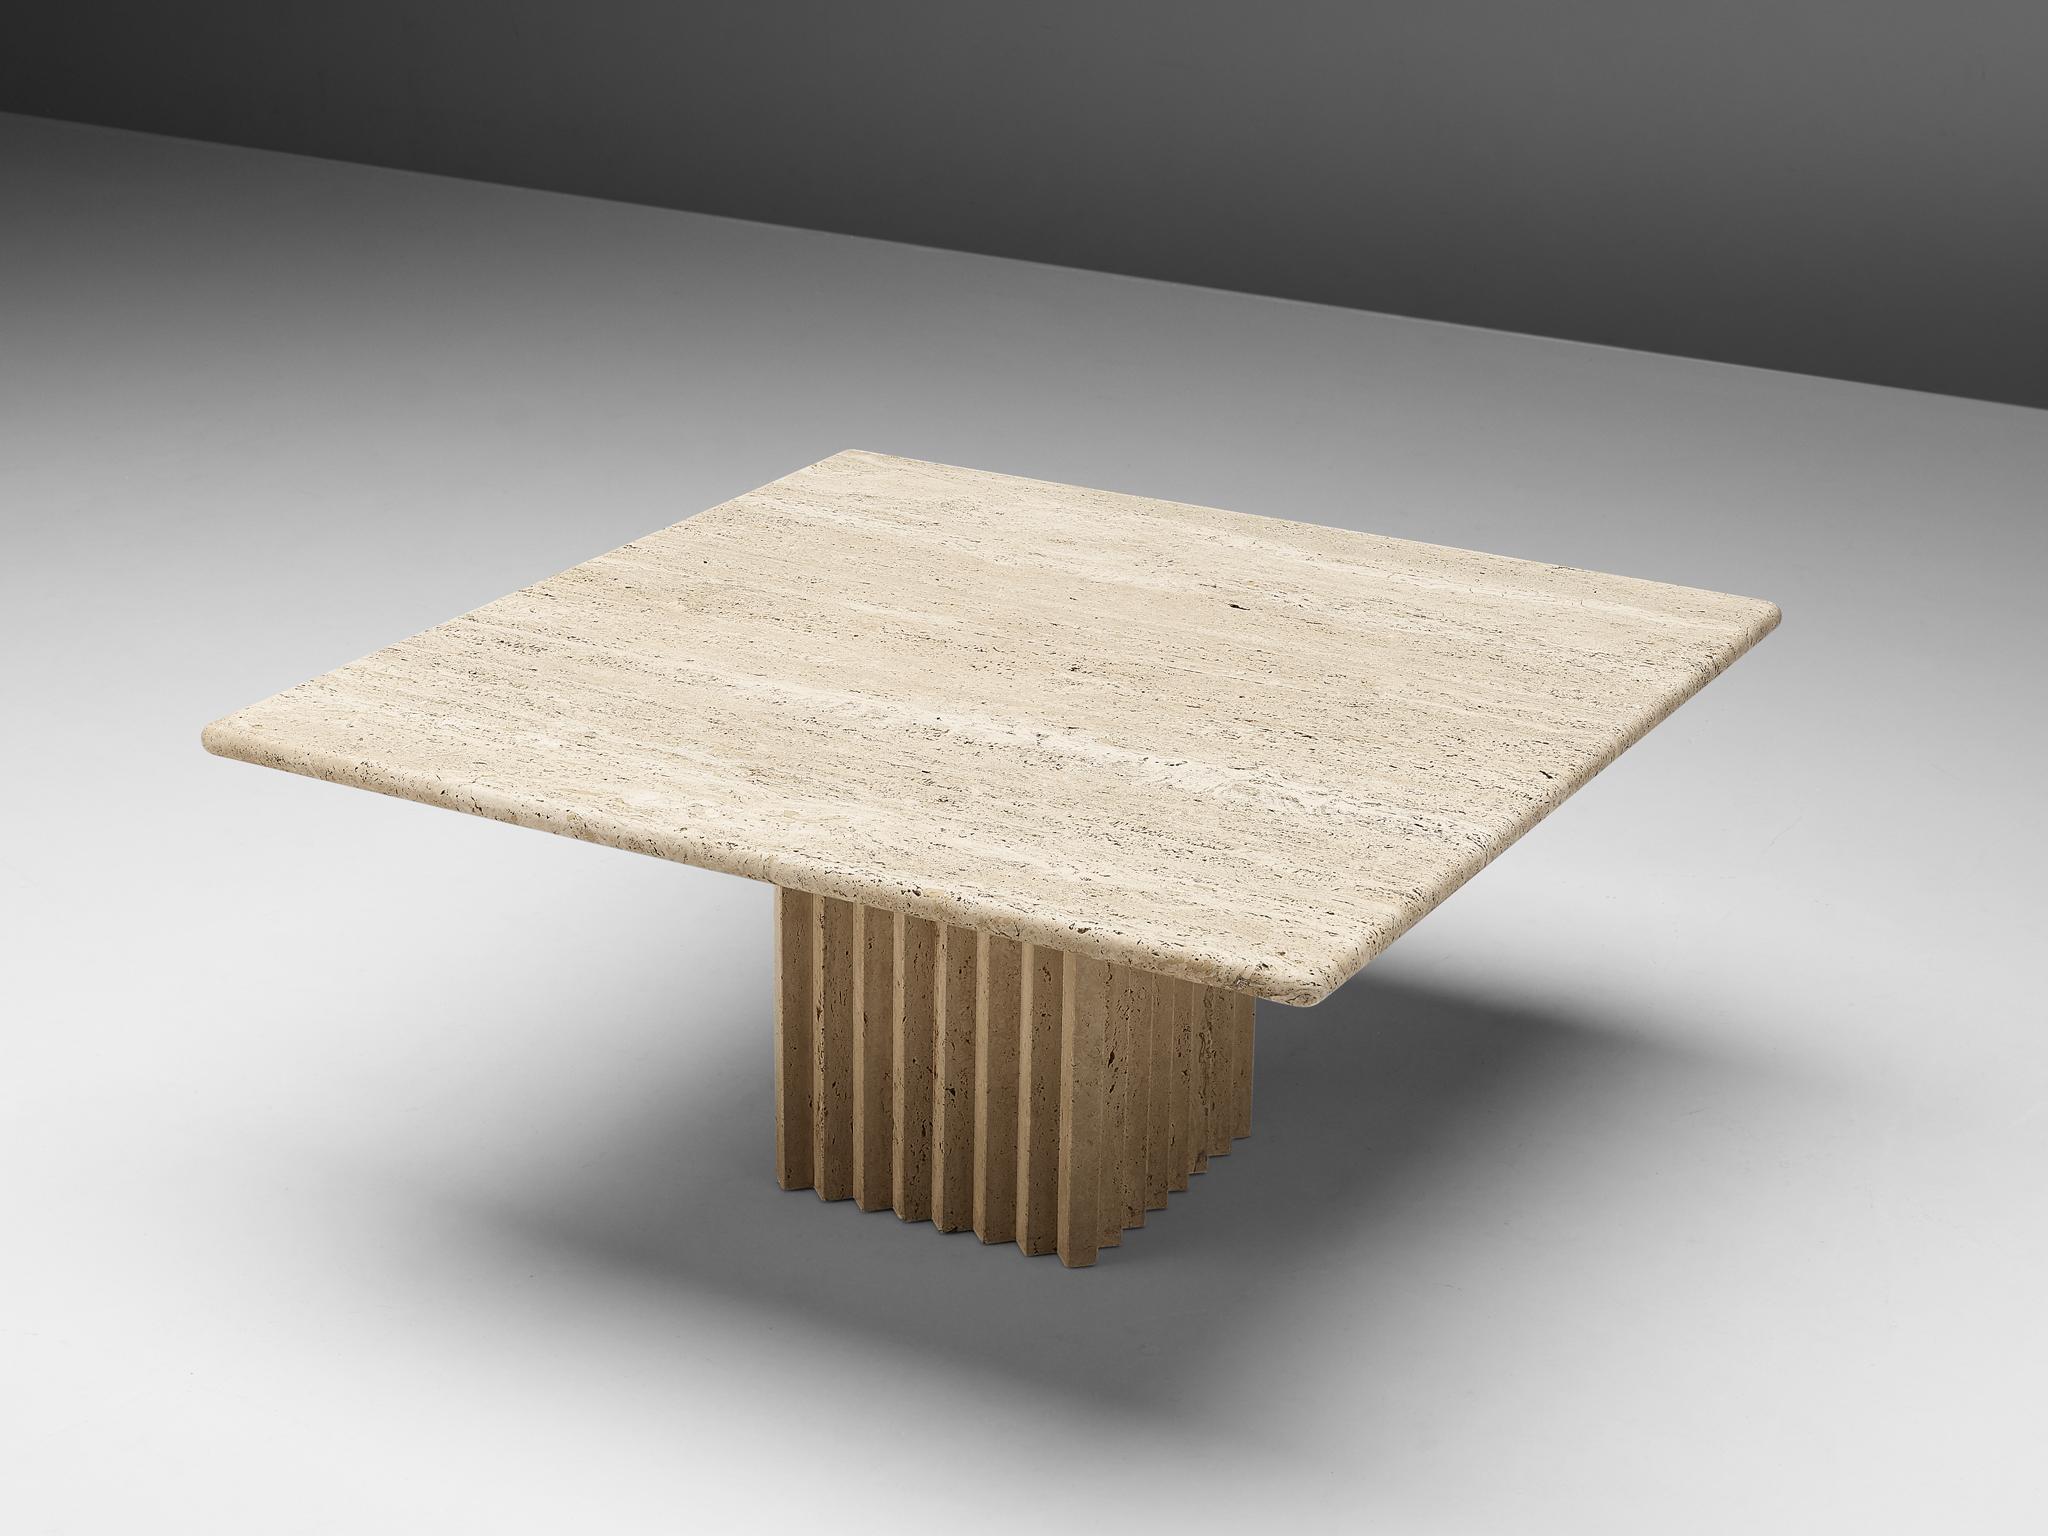 Coffee table, travertine, Italy, 1970s 

Coffee table with travertine rectangular tabletop and base. The base is structured by a fluted relief in vertical lines. The bright travertine gives the table a sculptural look. The natural layers of the